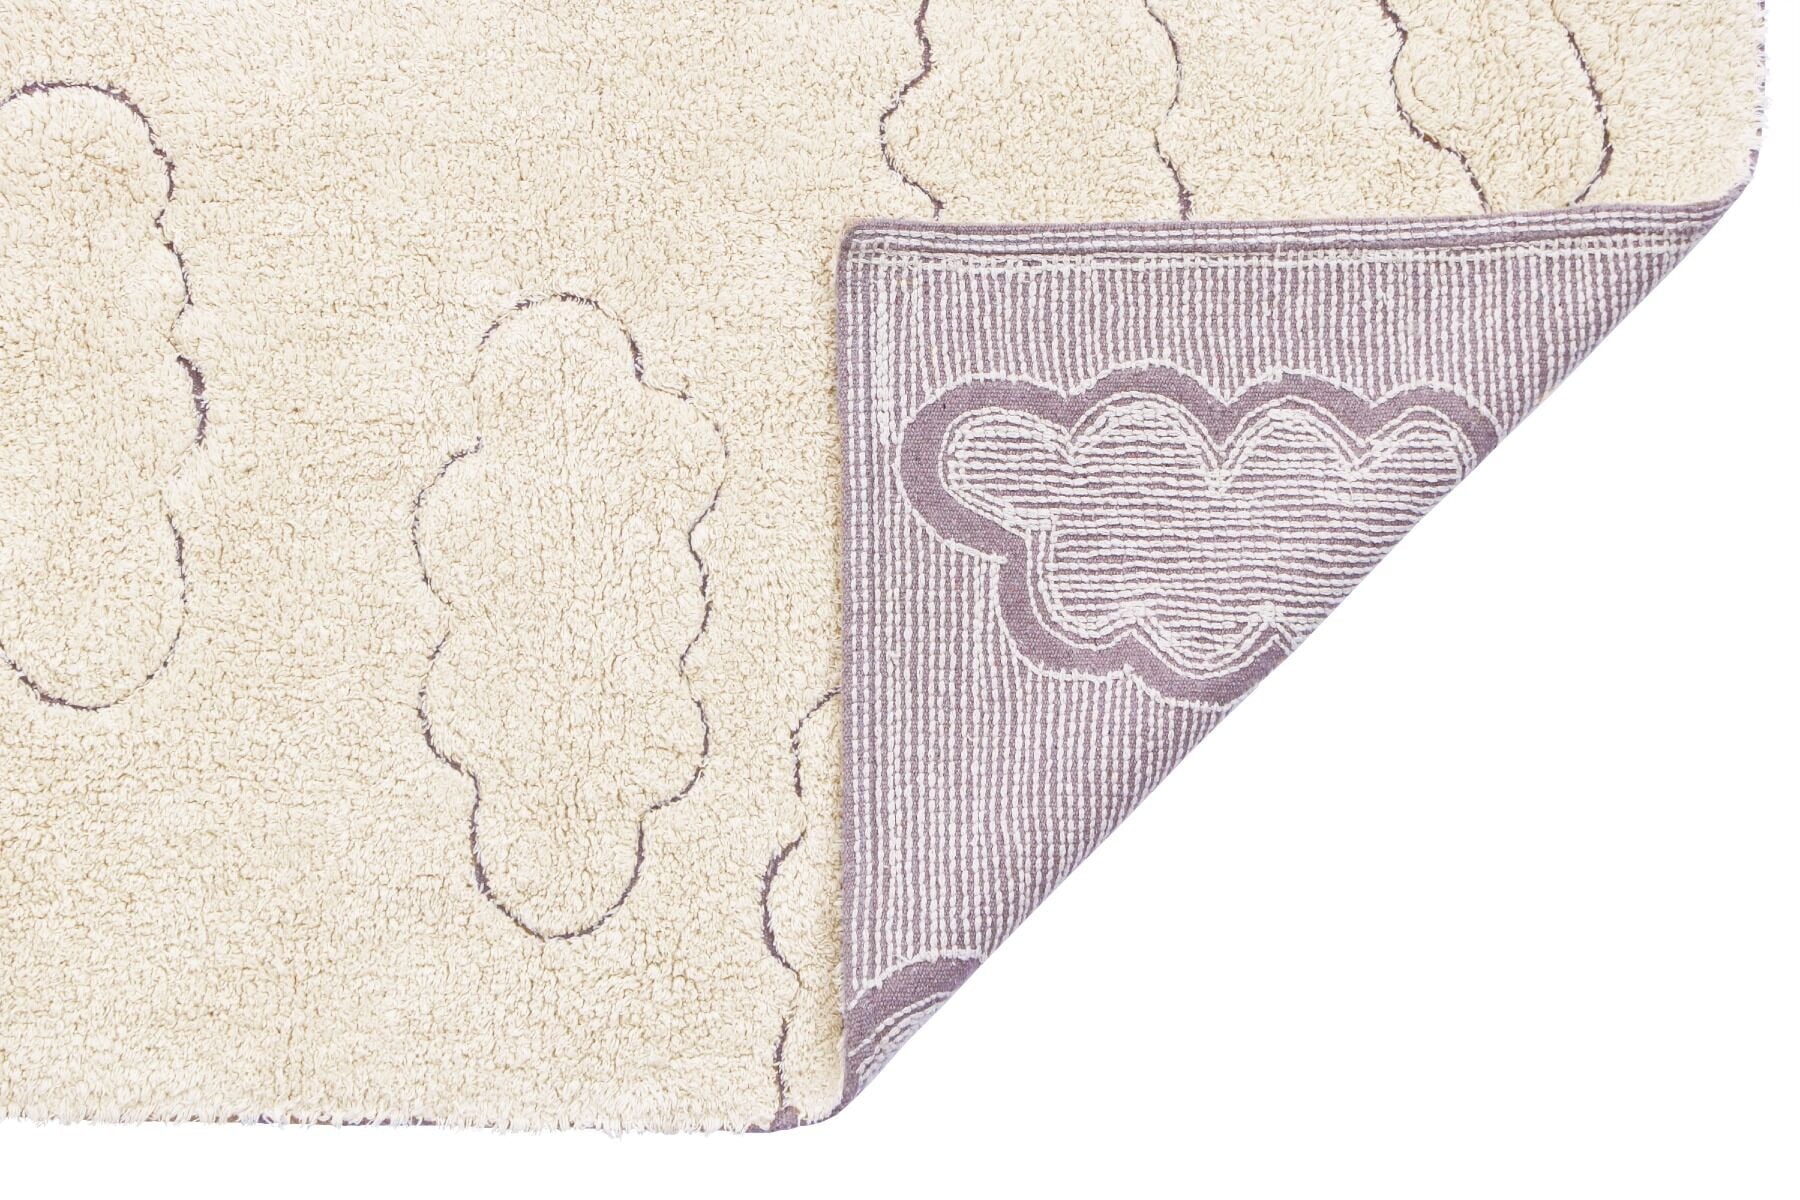 Lorena Canals washable rug Cycled Clouds, three sizes